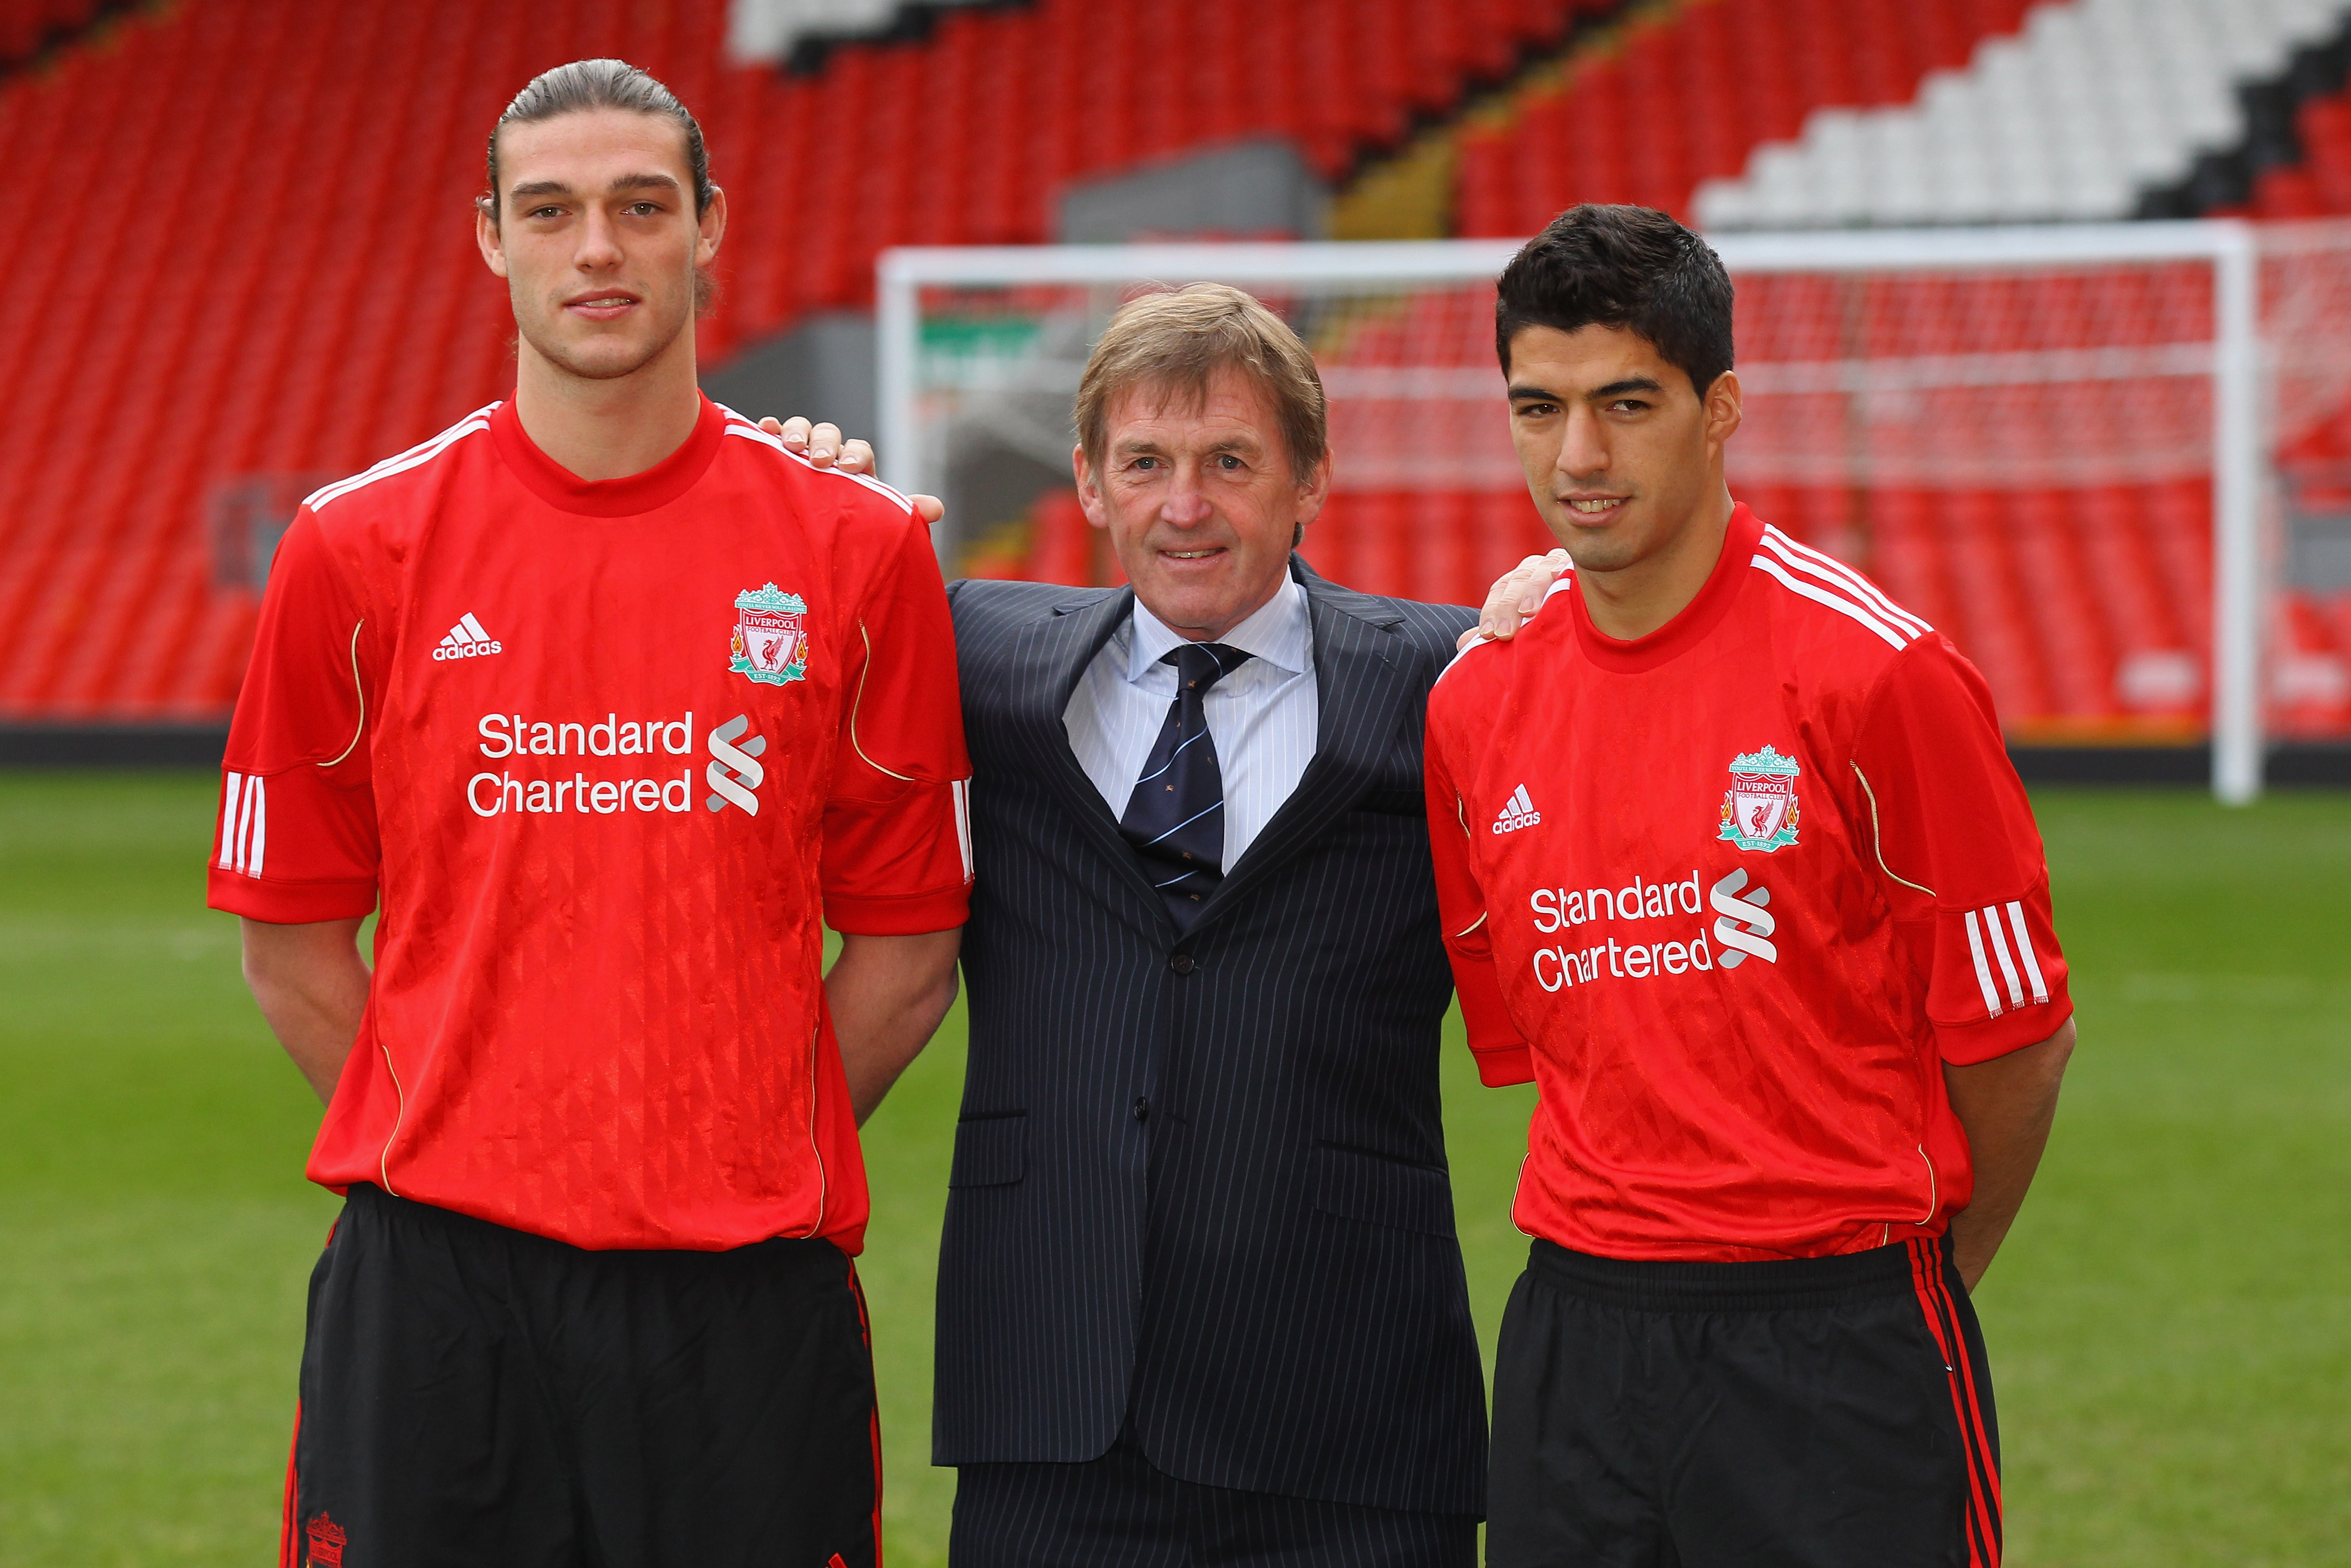 LIVERPOOL, ENGLAND - FEBRUARY 03:  Kenny Dalglish the manager of Liverpool stands between his new signings, Andy Carroll (l) and Luis Suarez (r) during a photocall at Anfield on February 3, 2011 in Liverpool, England.  (Photo by Alex Livesey/Getty Images)